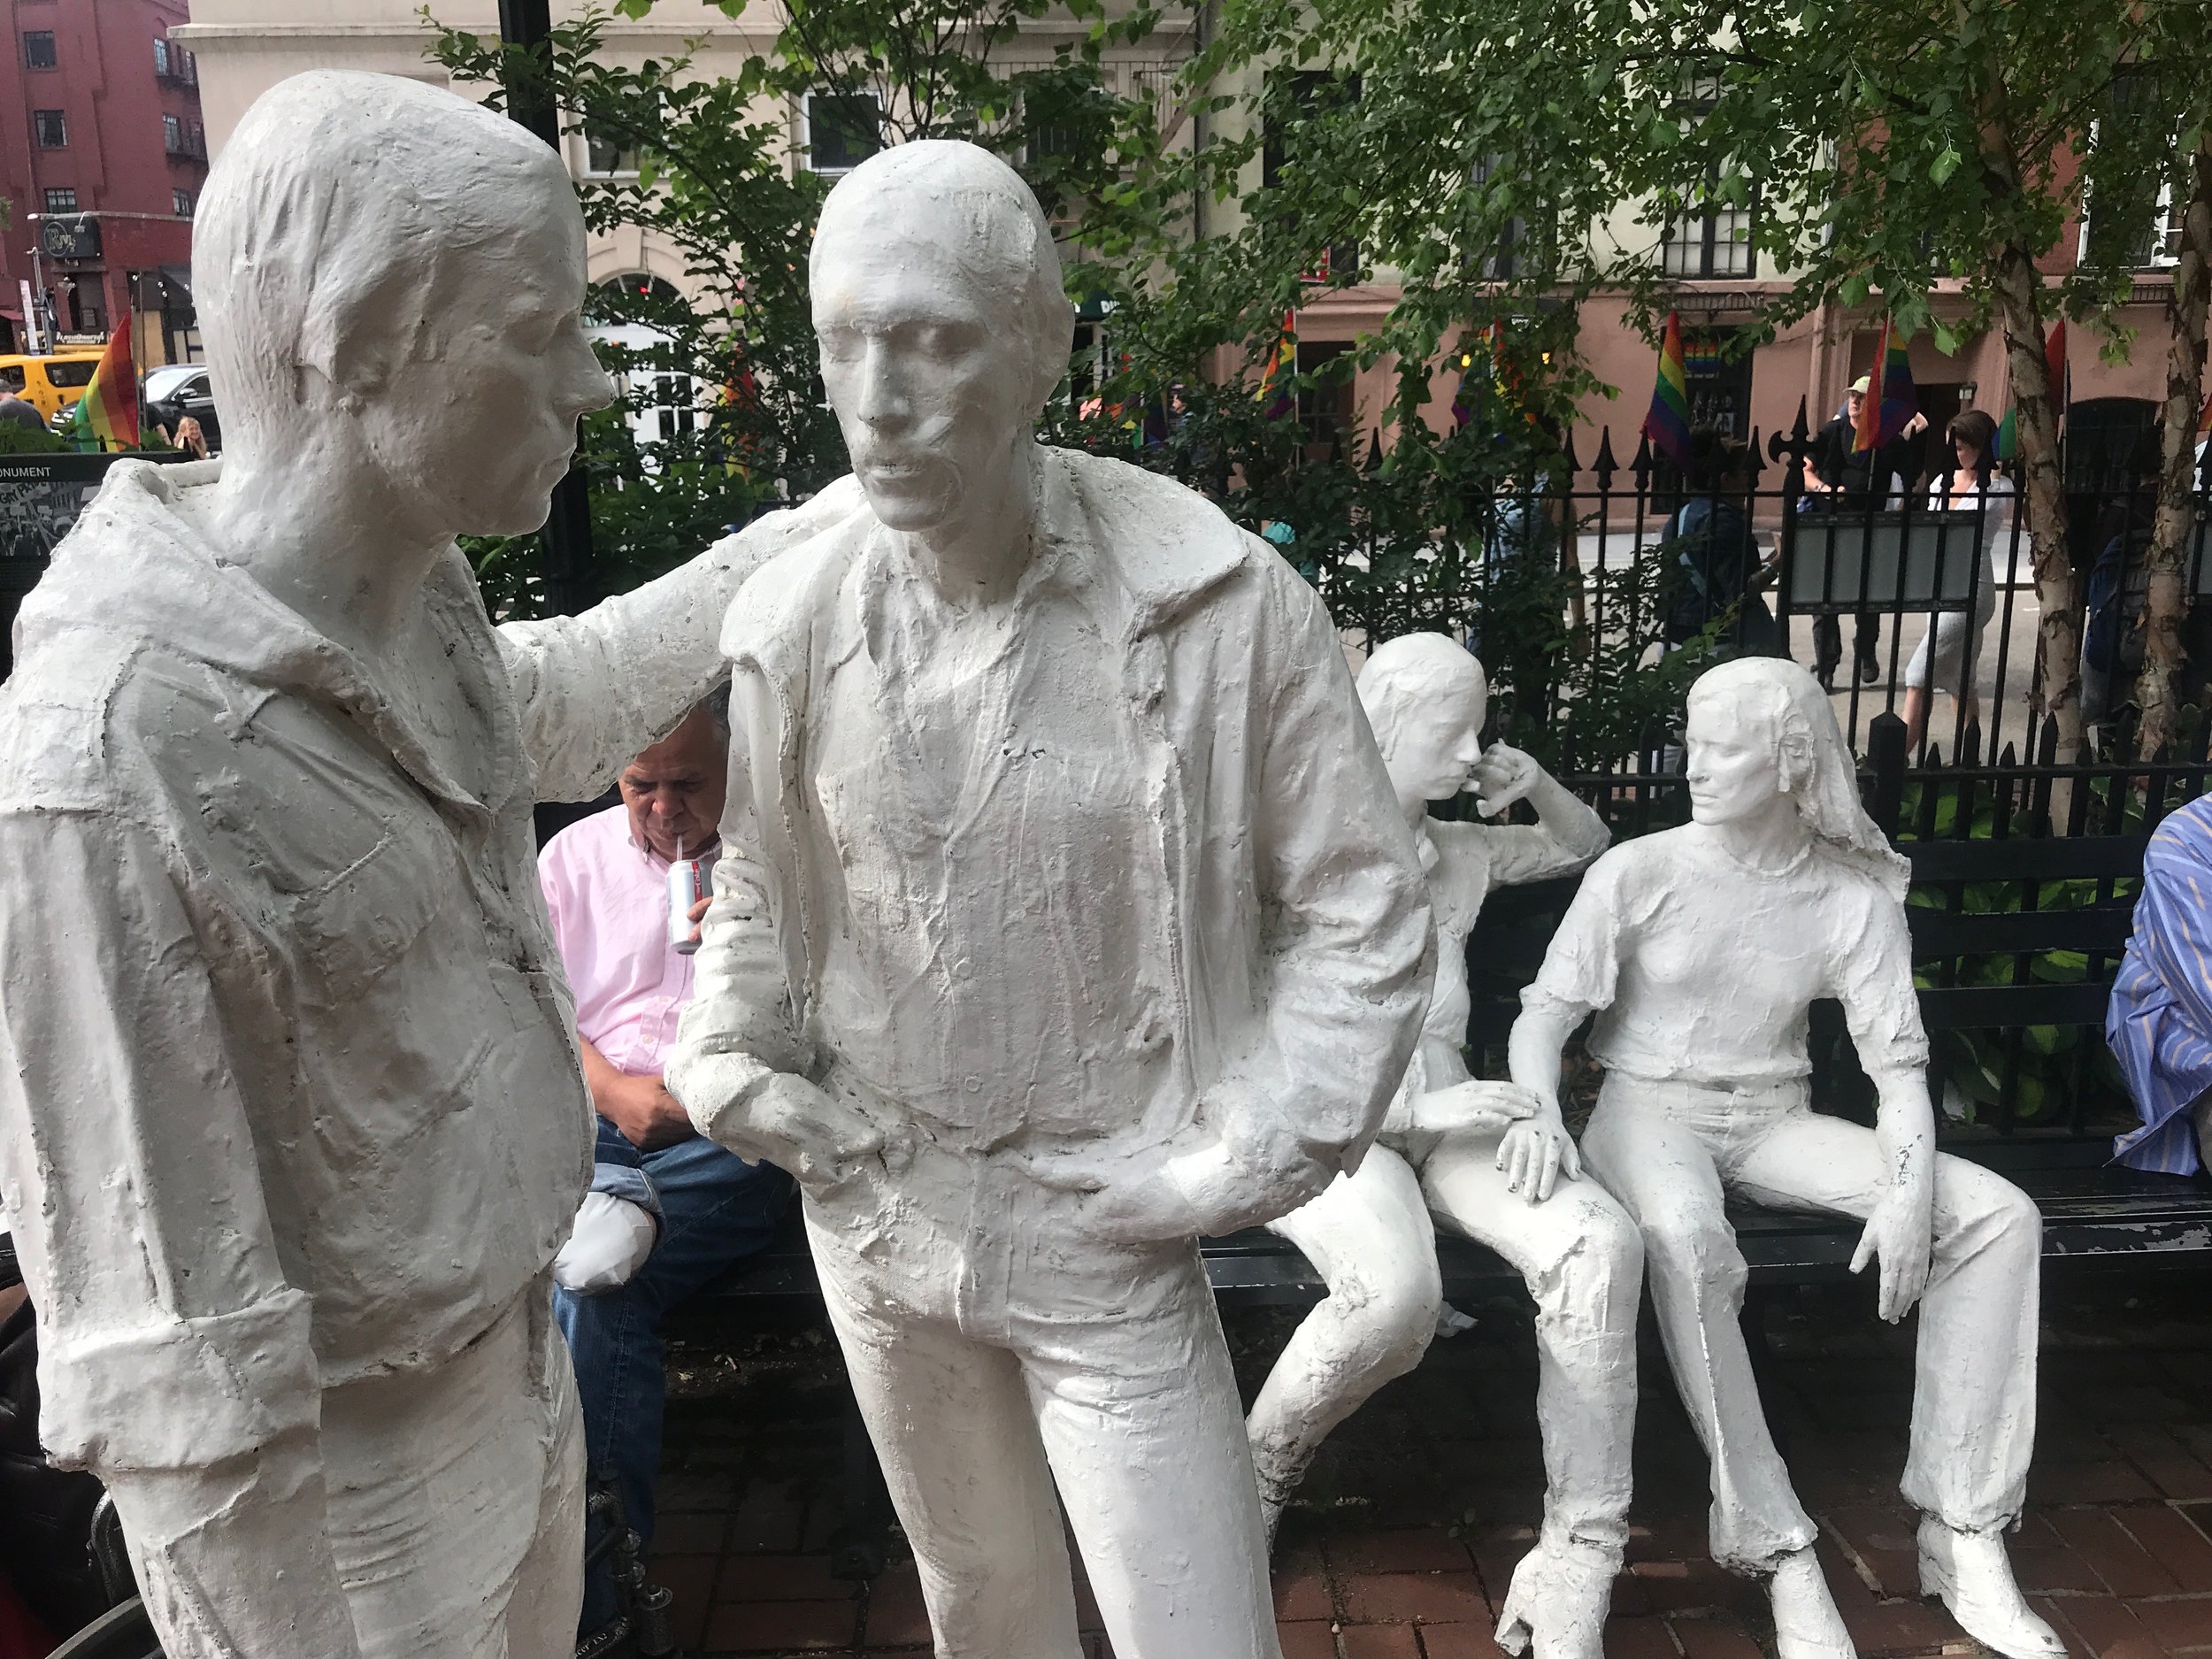  Rainbow flags, sculptures and visitors at the former Sheridan Square in New York's Greenwich Village, which is now part of the Stonewall National Monument. 